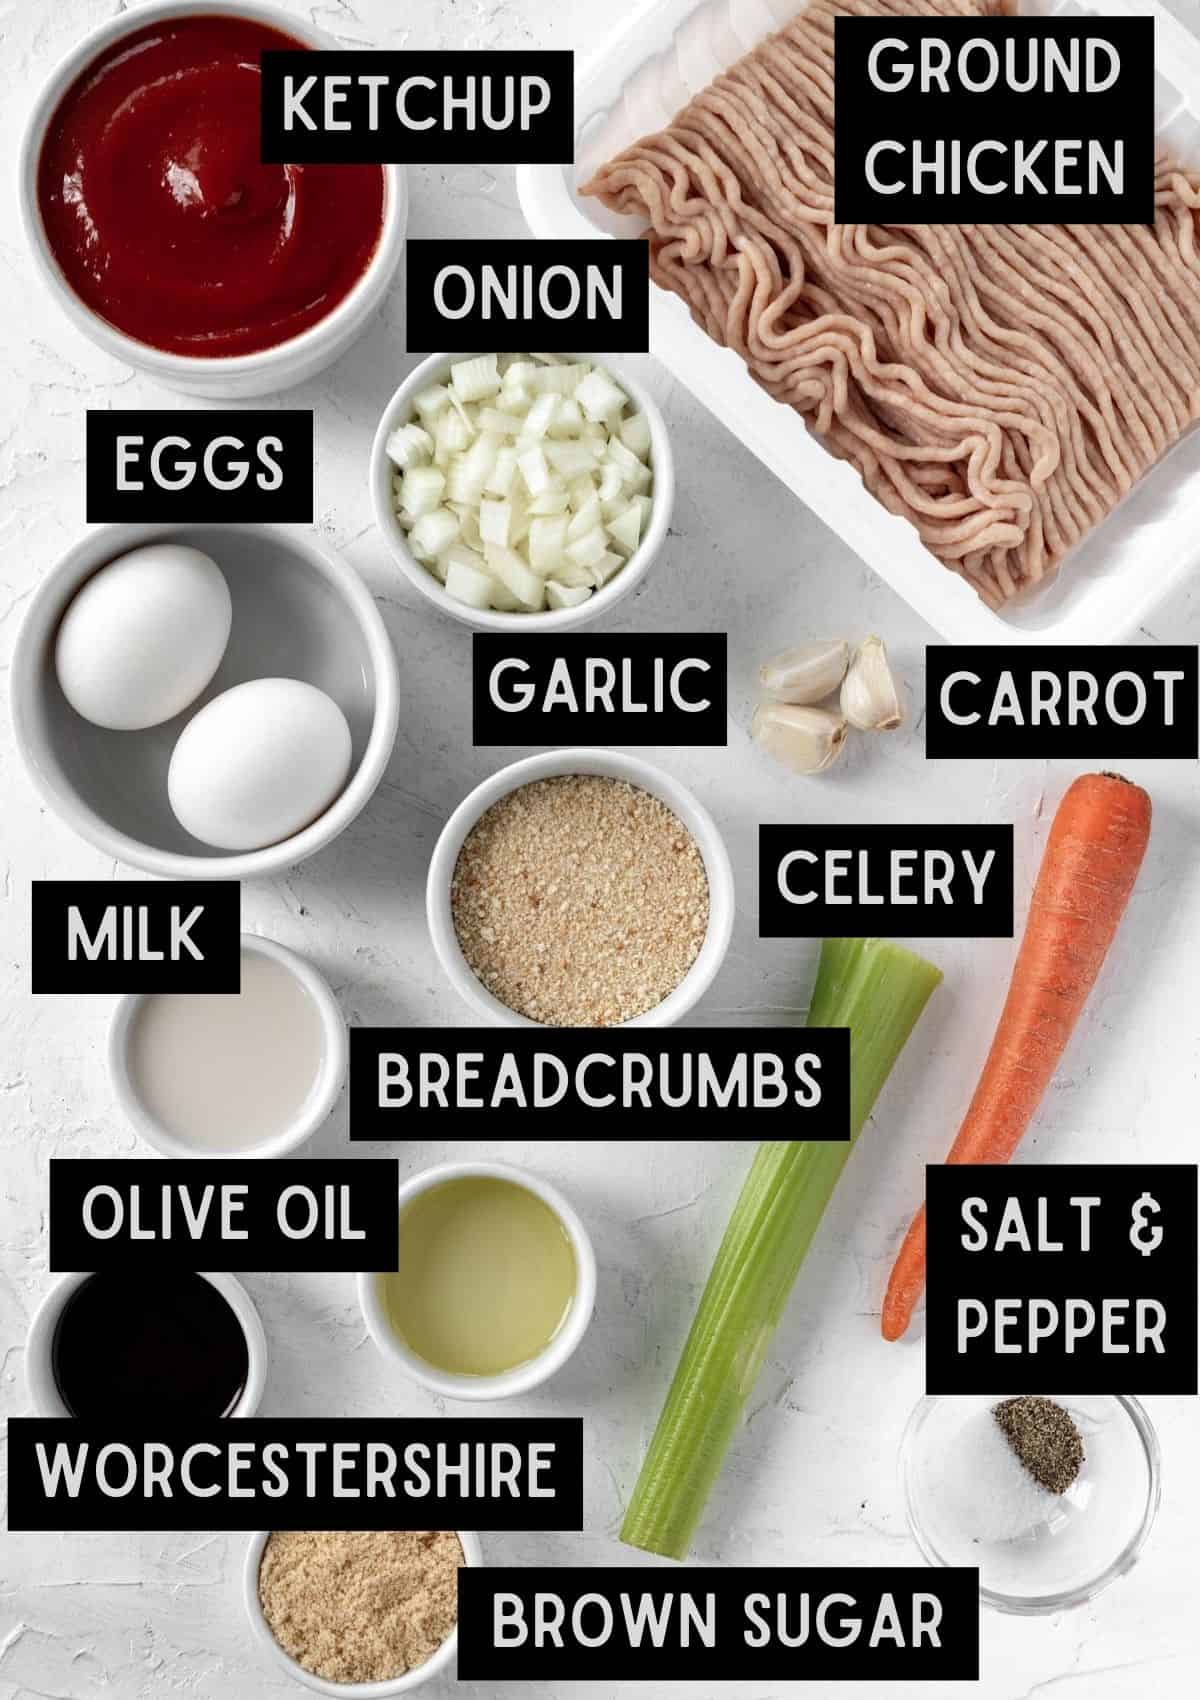 Labelled ingredients for ground chicken meatloaf (see recipe for details).